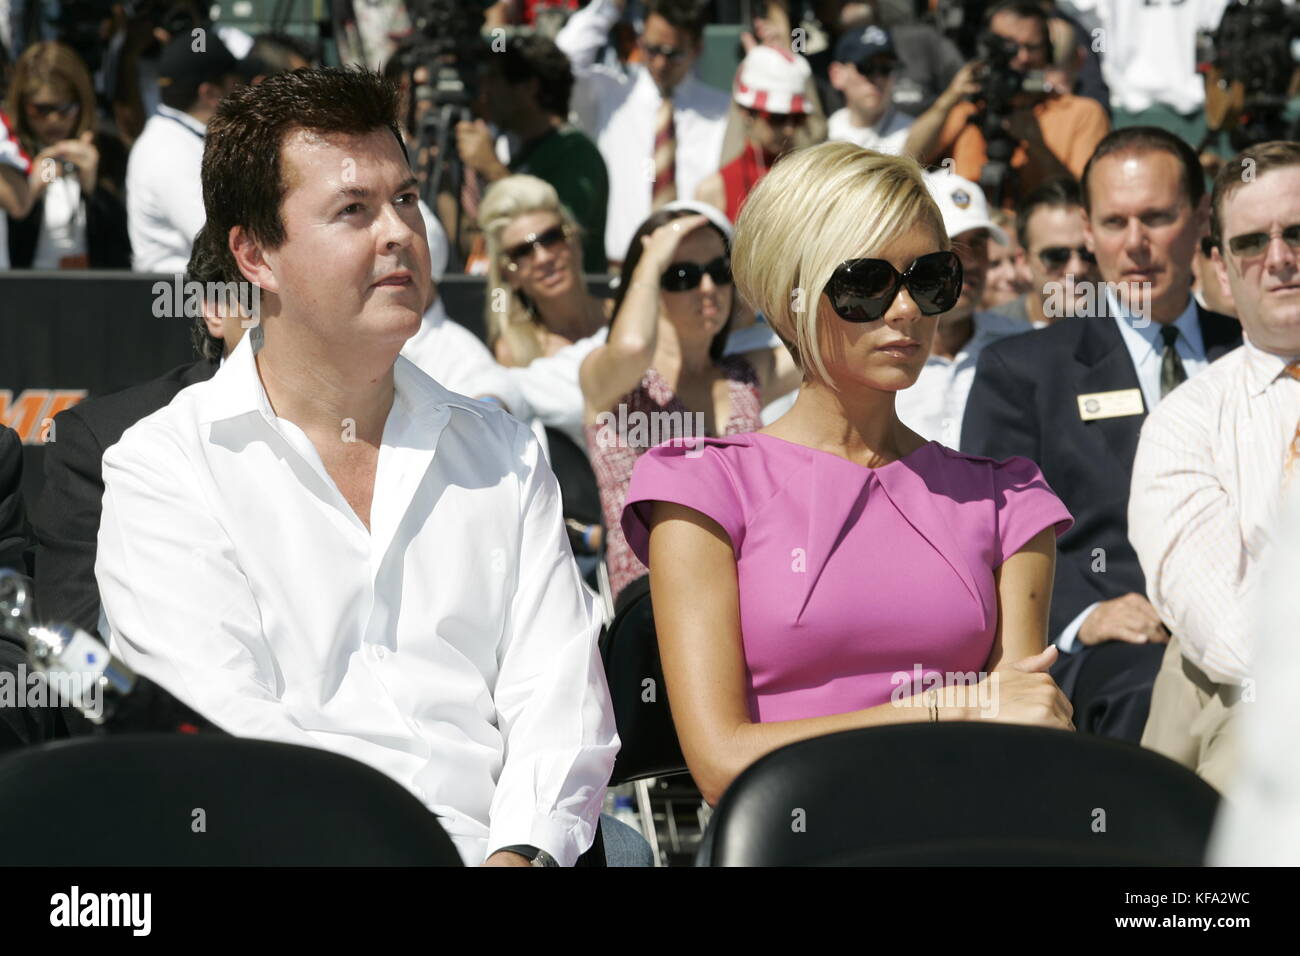 Victoria Beckham, wife of David Beckham, with Simon Fuller, left, at the official presentation of David Beckham to the Los Angeles Galaxy at the Home Depot Center in Carson, CA on July 13, 2007. Photo credit: Francis Specker Stock Photo